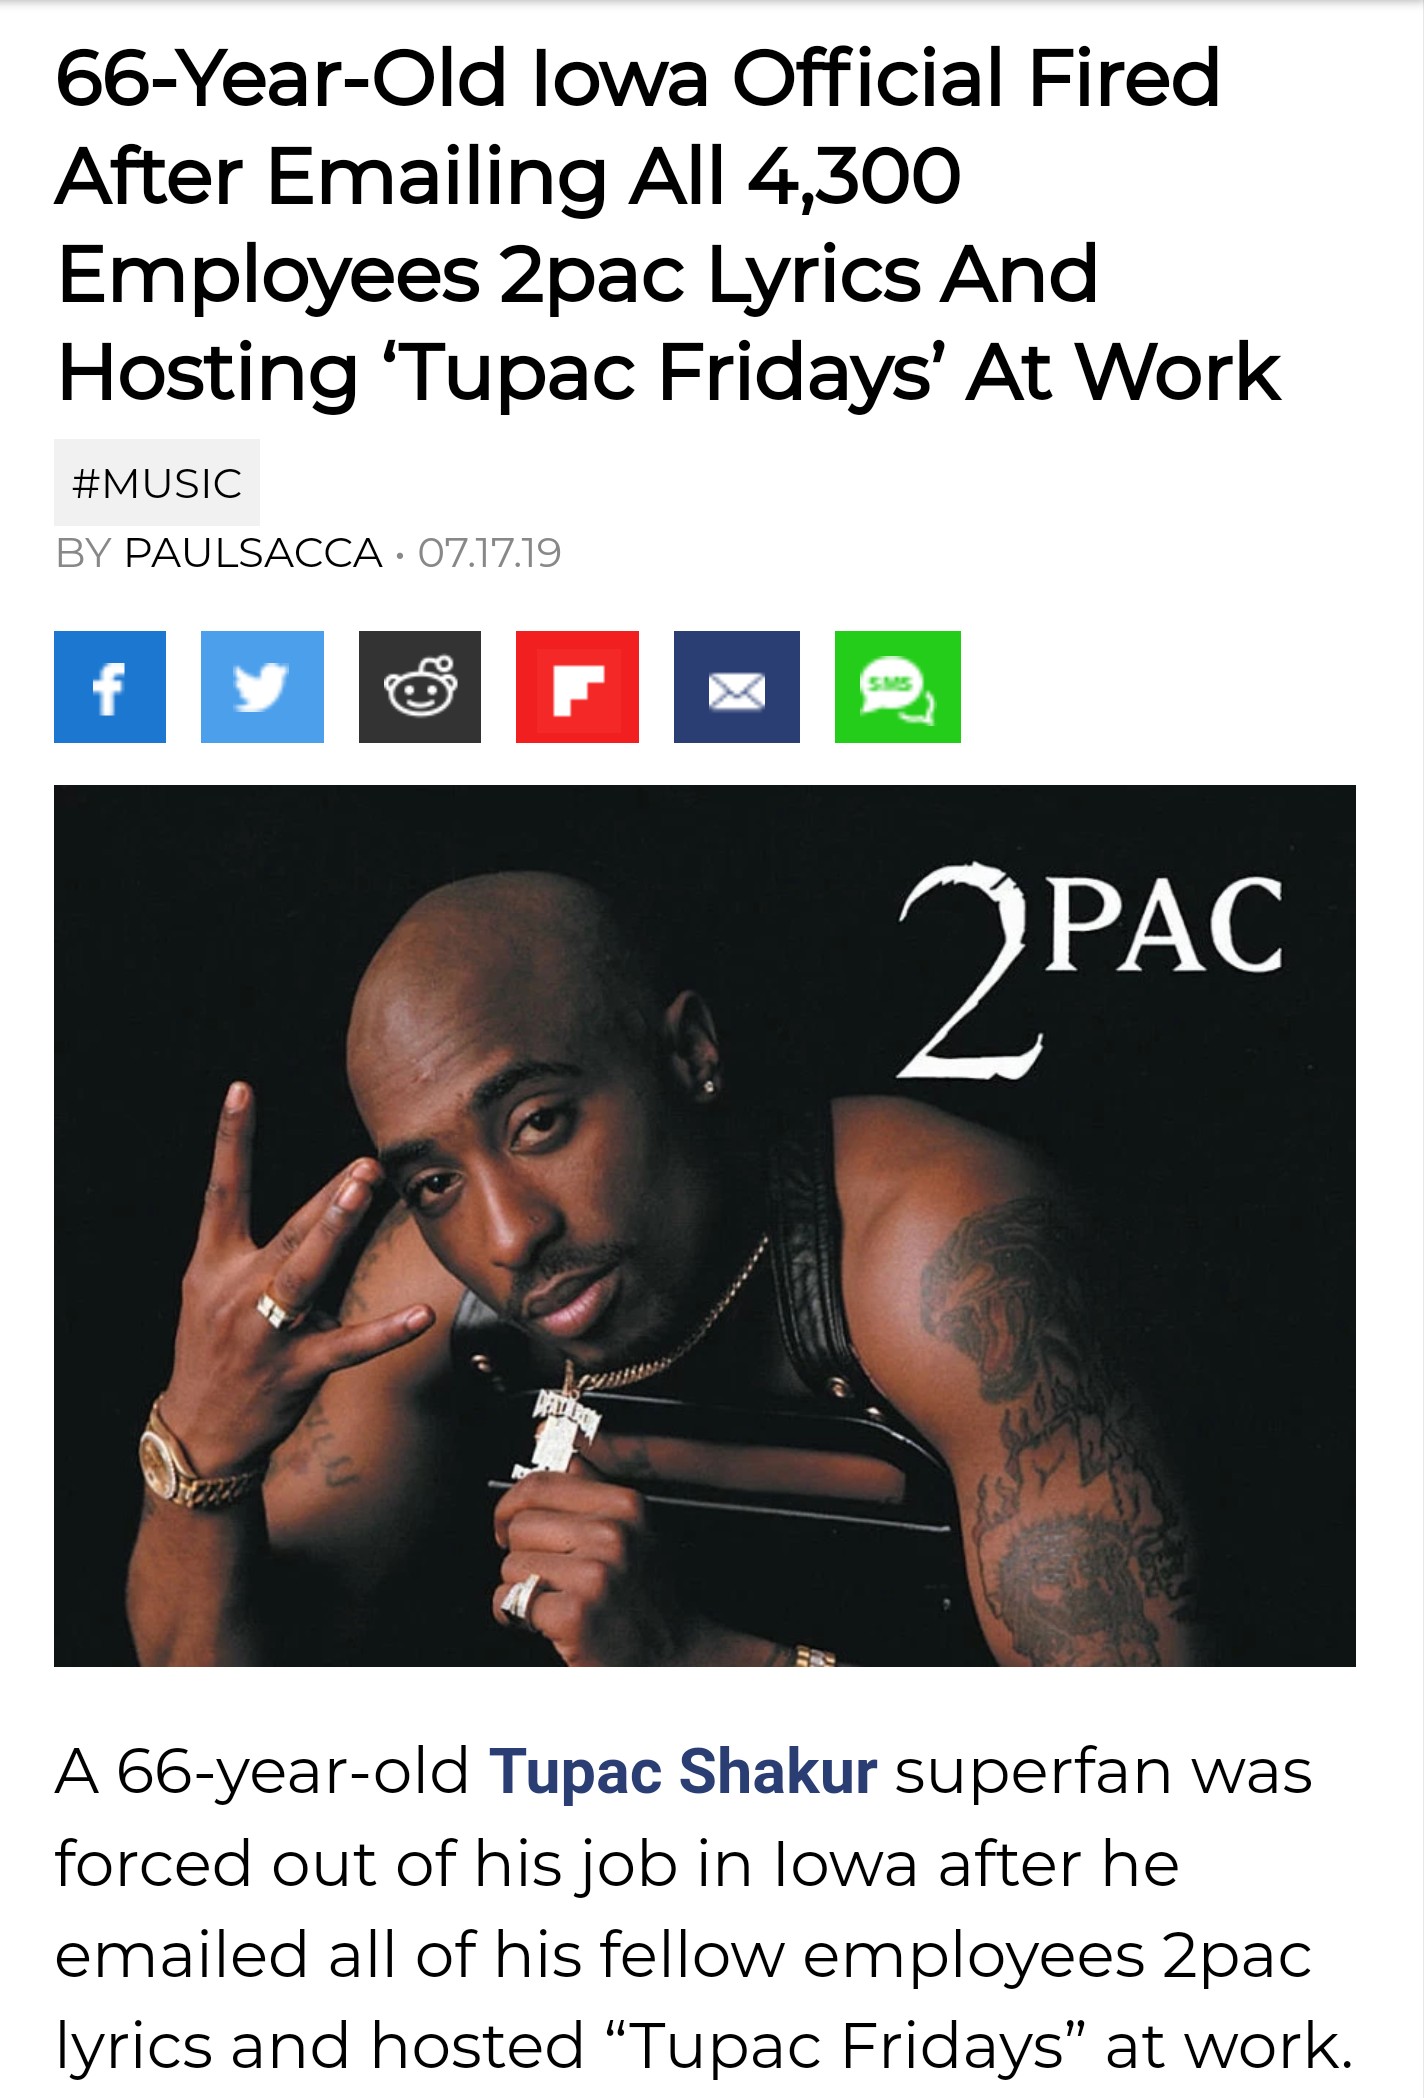 2pac all eyez on me - 66YearOld Iowa Official Fired After Emailing All 4,300 Employees 2pac Lyrics And Hosting 'Tupac Fridays' At Work By Paulsacca 07.17.19 Pac A 66yearold Tupac Shakur superfan was forced out of his job in lowa after he emailed all of hi